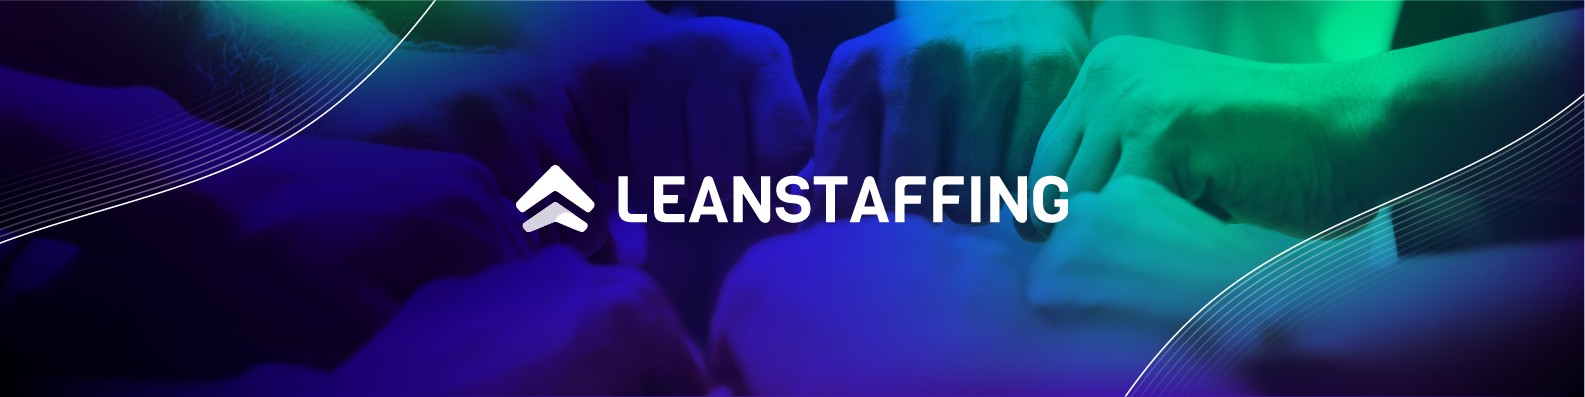 Lean Staffing Solutions logo